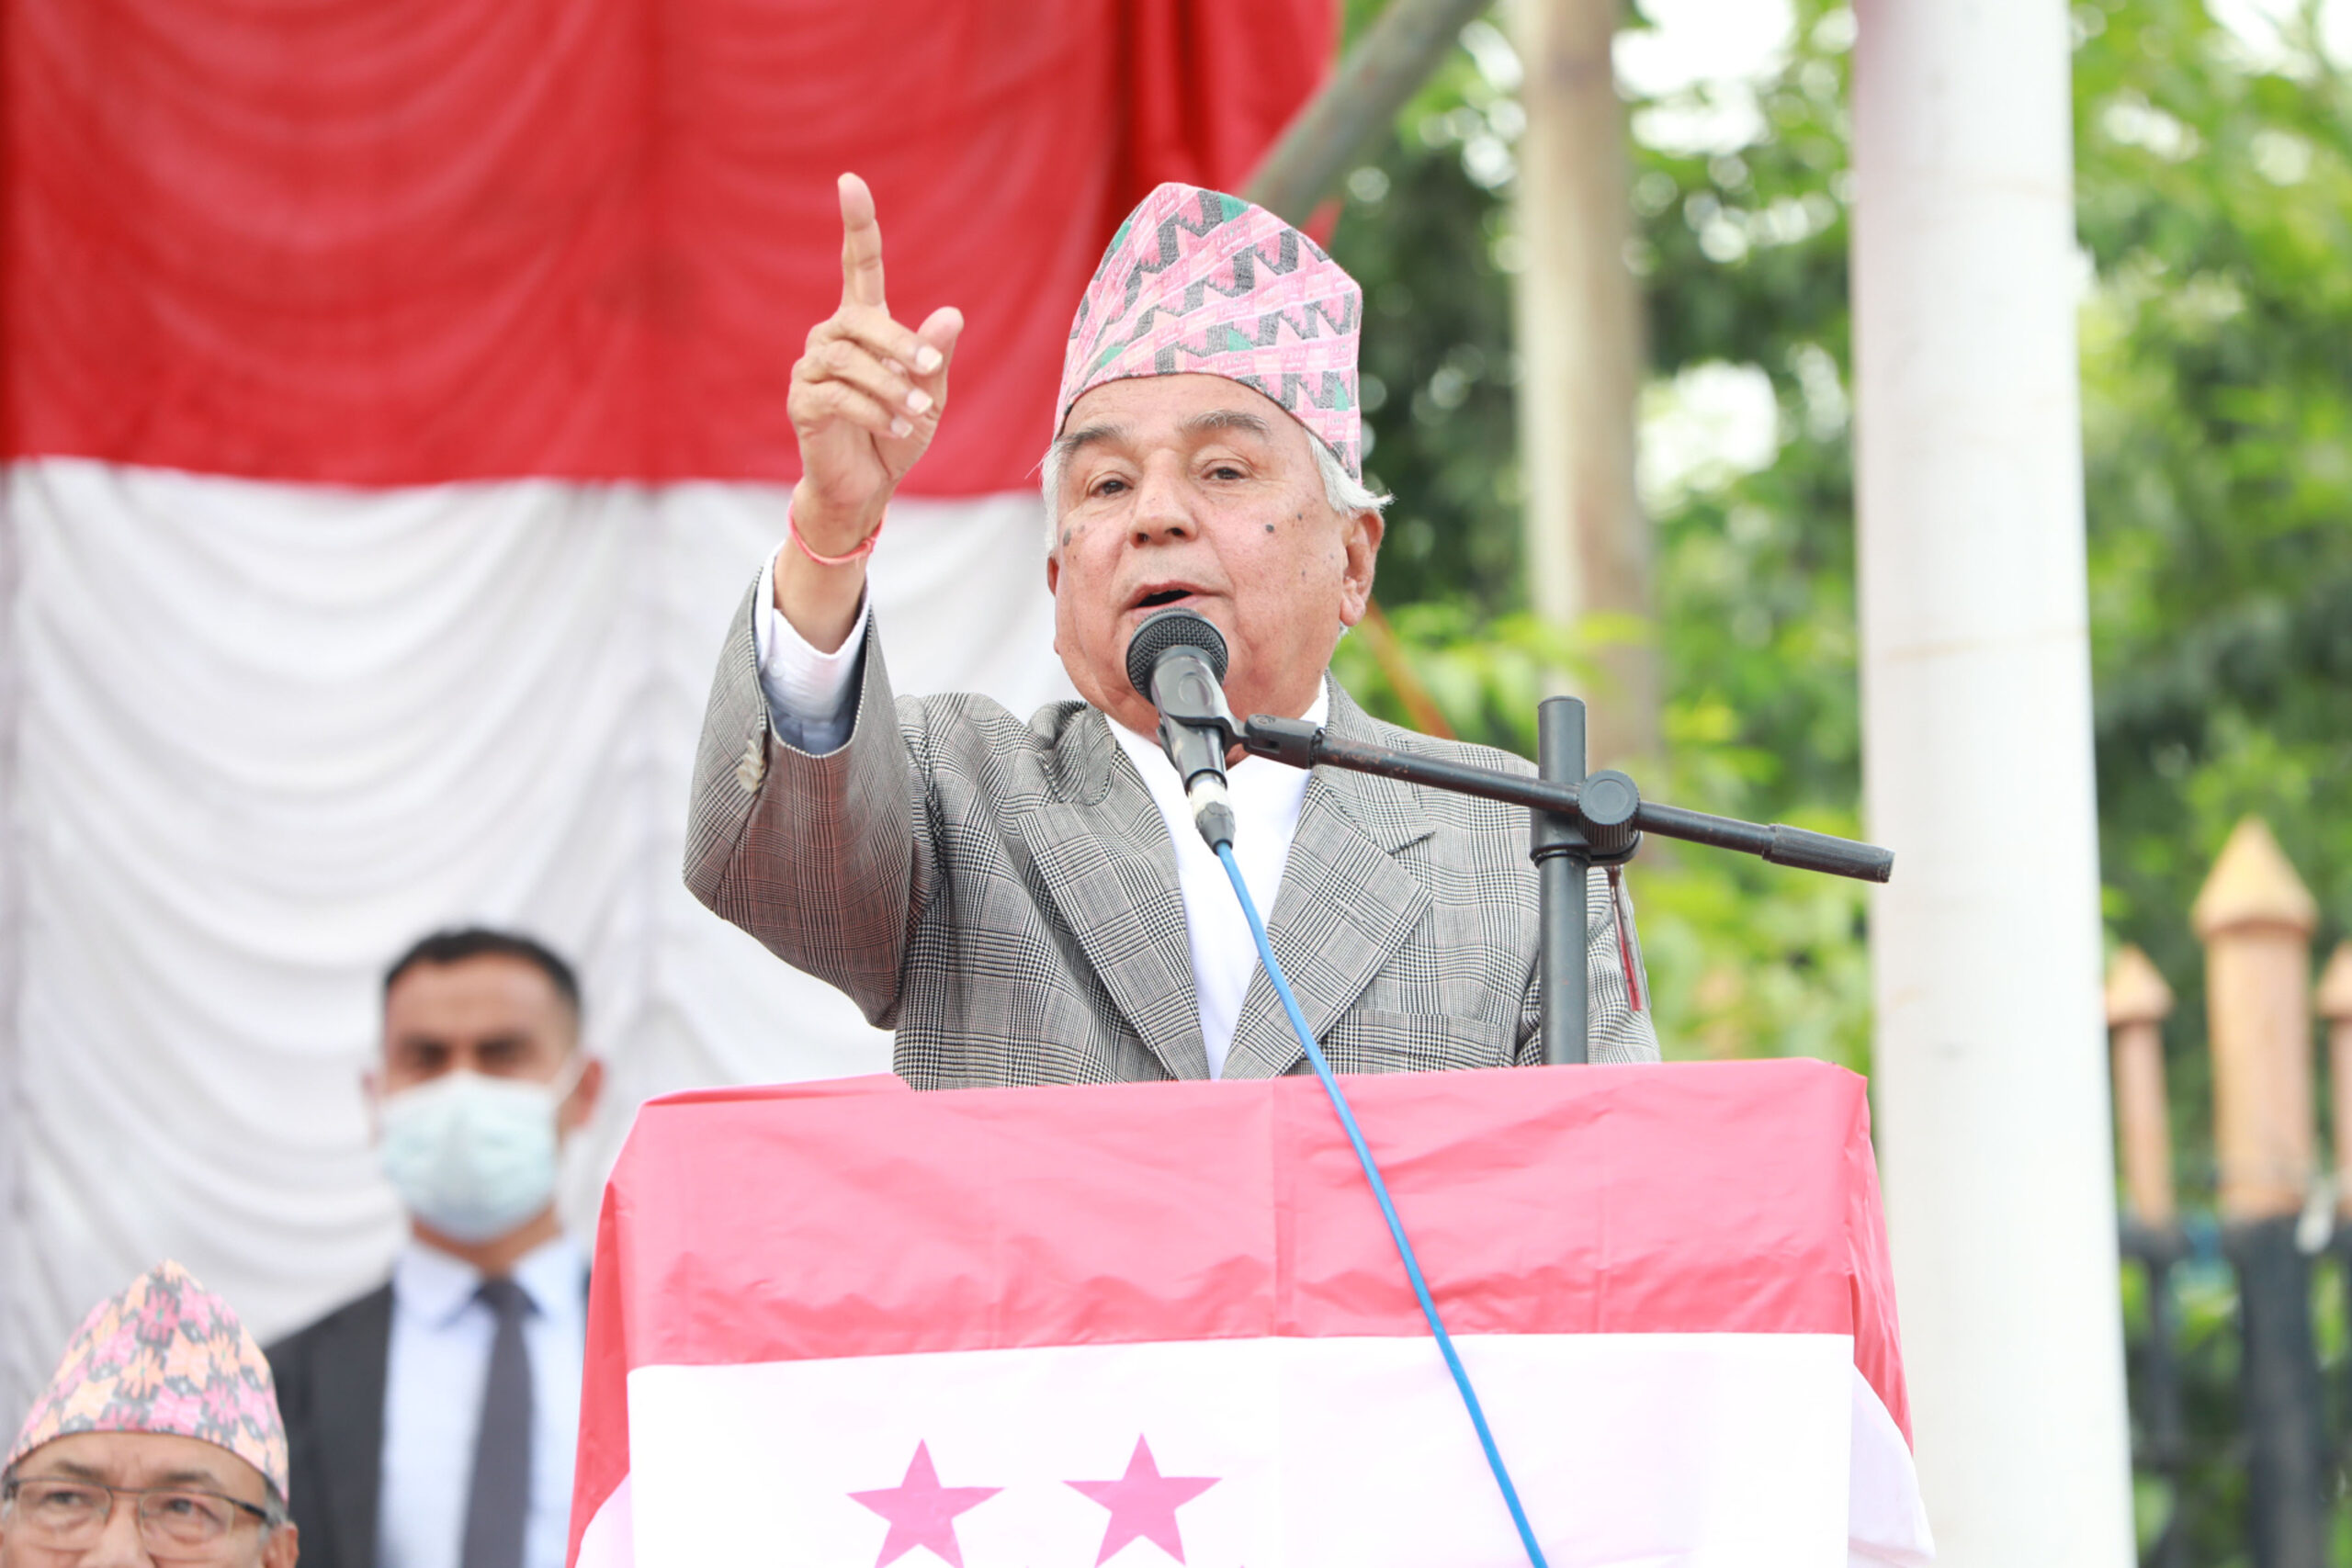 Electoral alliance out of fear and compulsion: NC leader Poudel